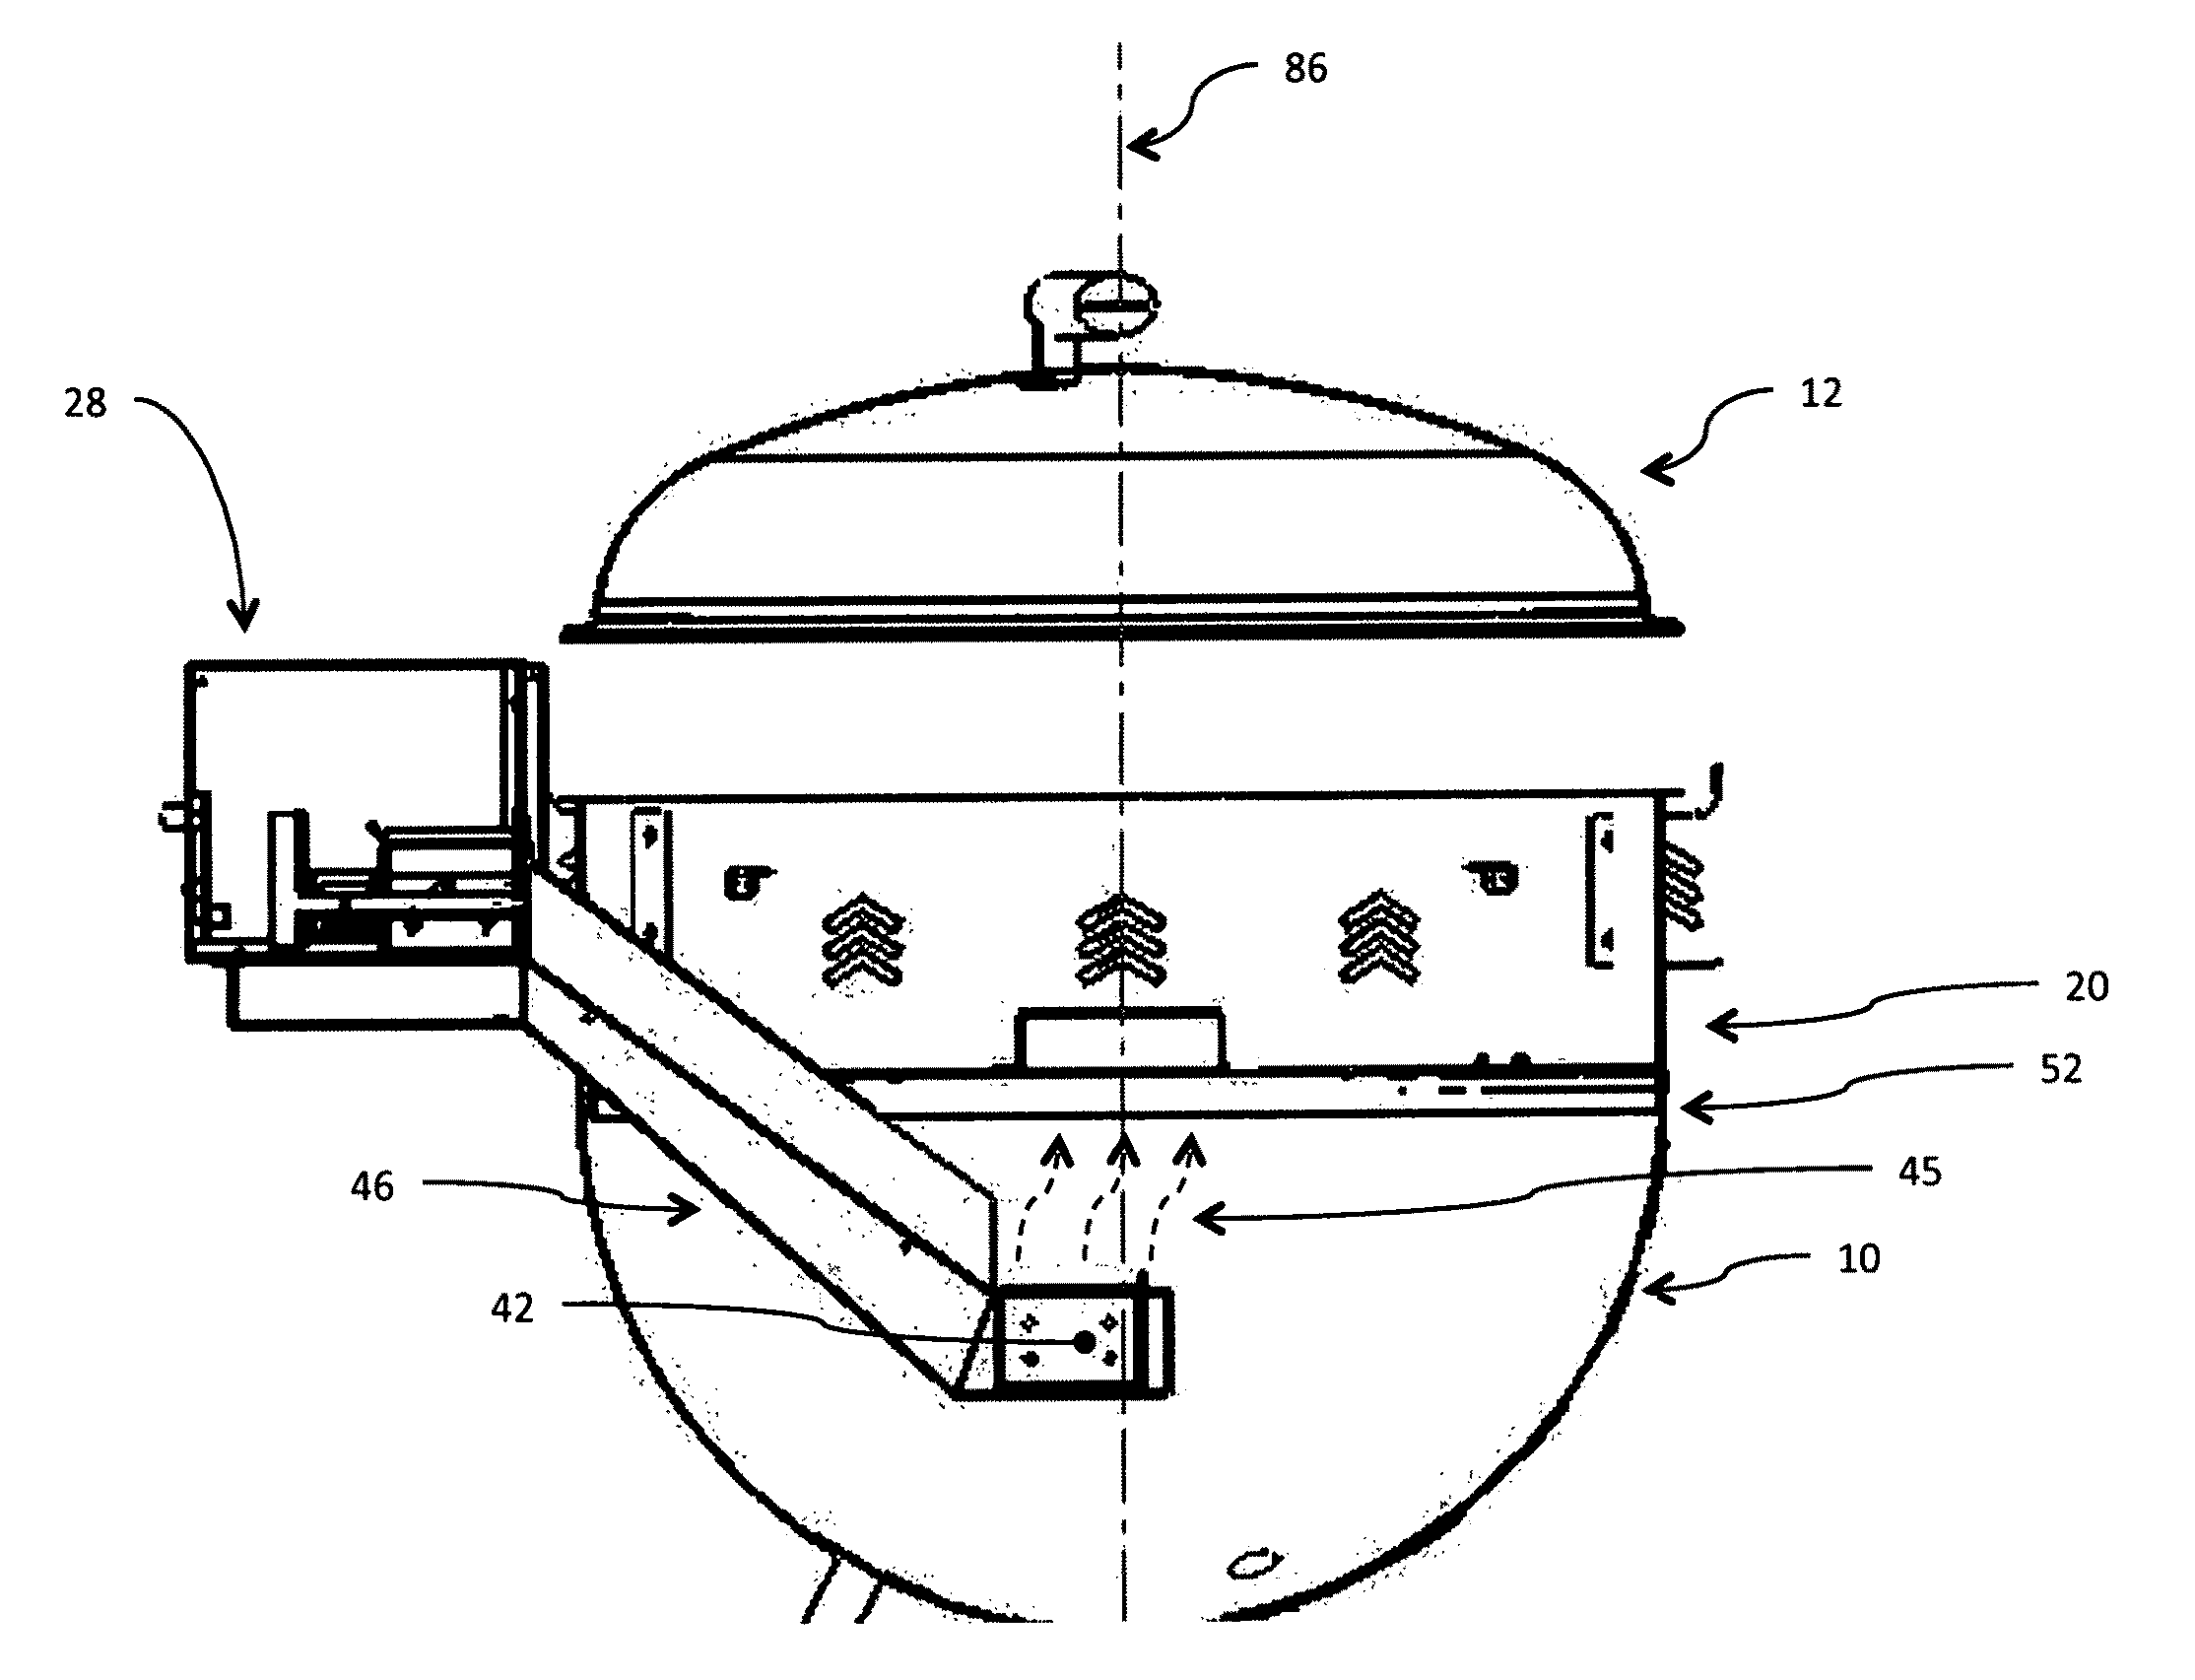 System for converting a kettle-type barbecue to employ fuel pellets